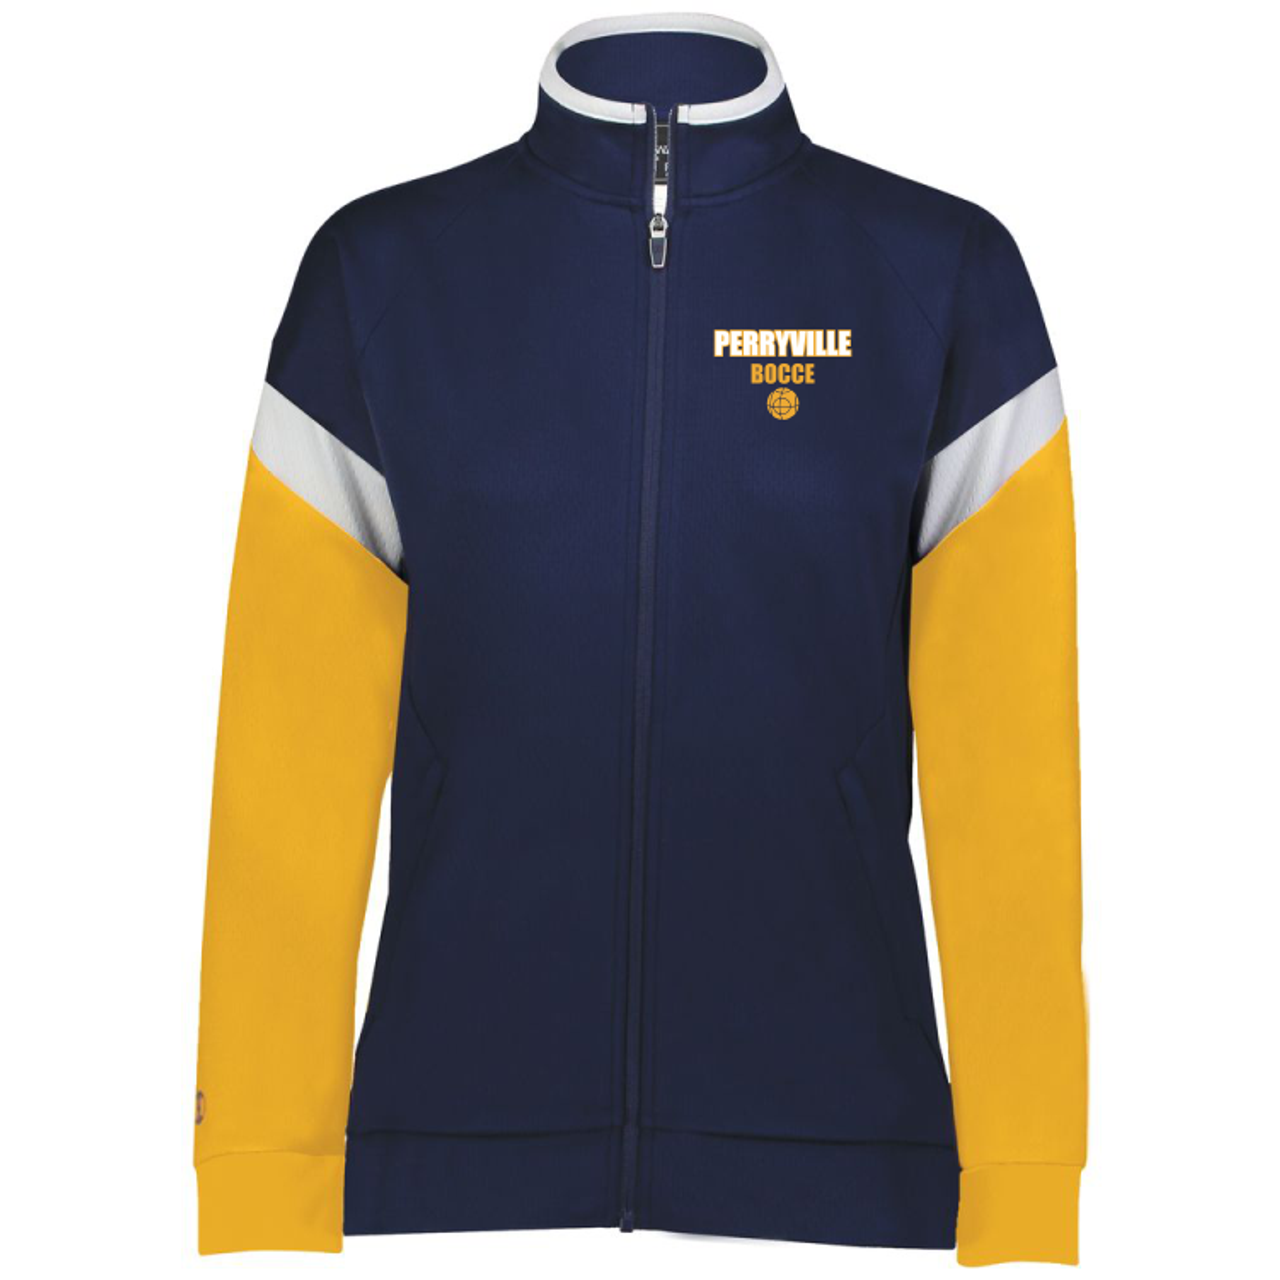 Perryville MS Bocce Warm Up Jacket